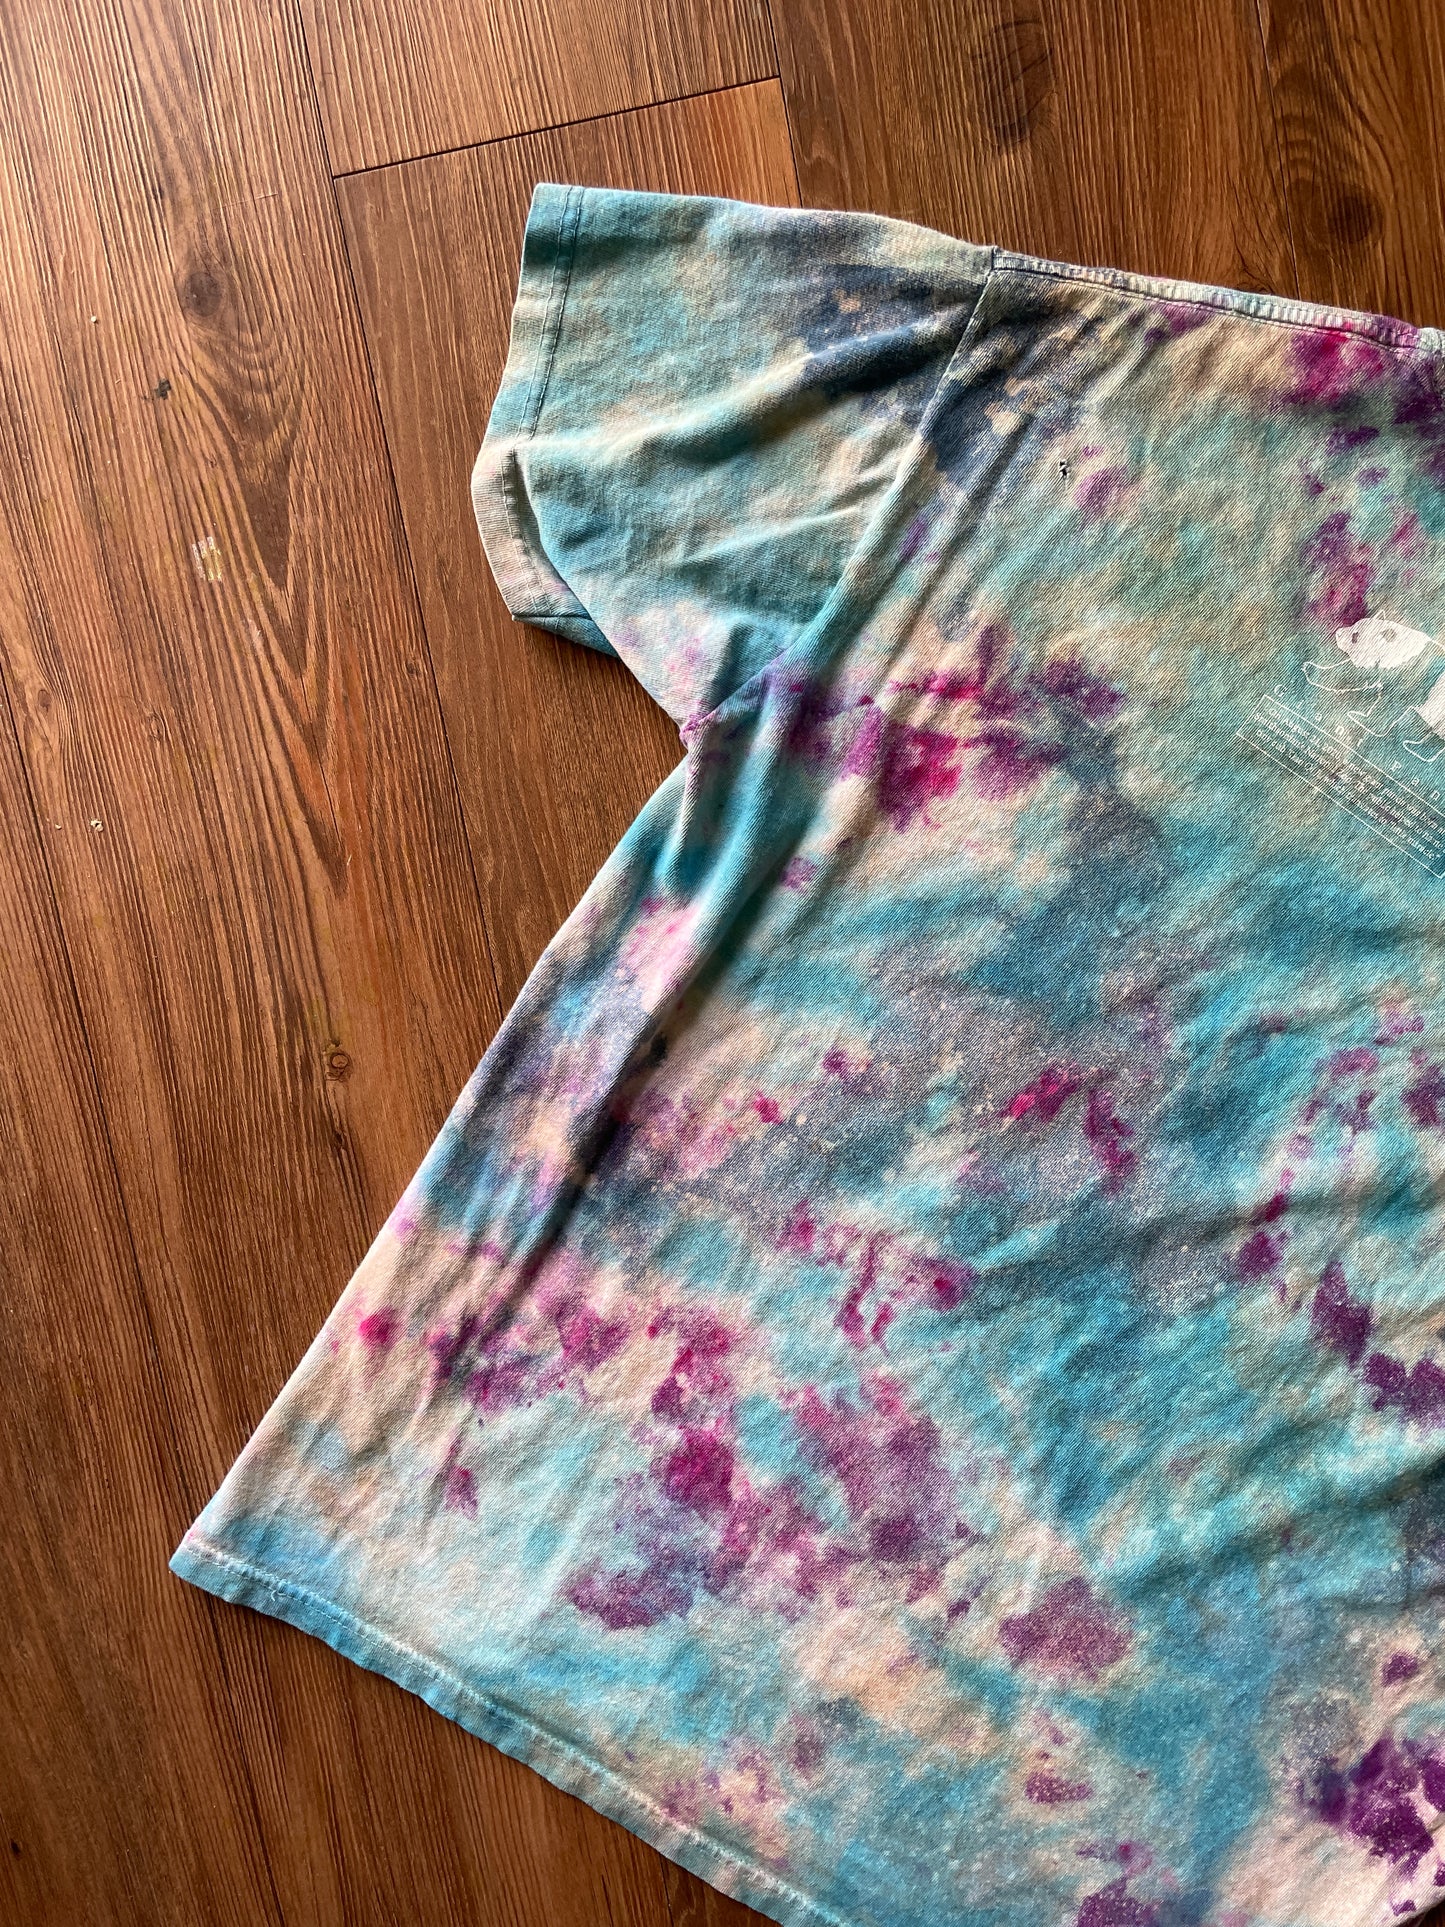 LARGE Men’s Giant Panda Galaxy Handmade Tie Dye T-Shirt | One-Of-a-Kind Pastel Blue and Purple Short Sleeve